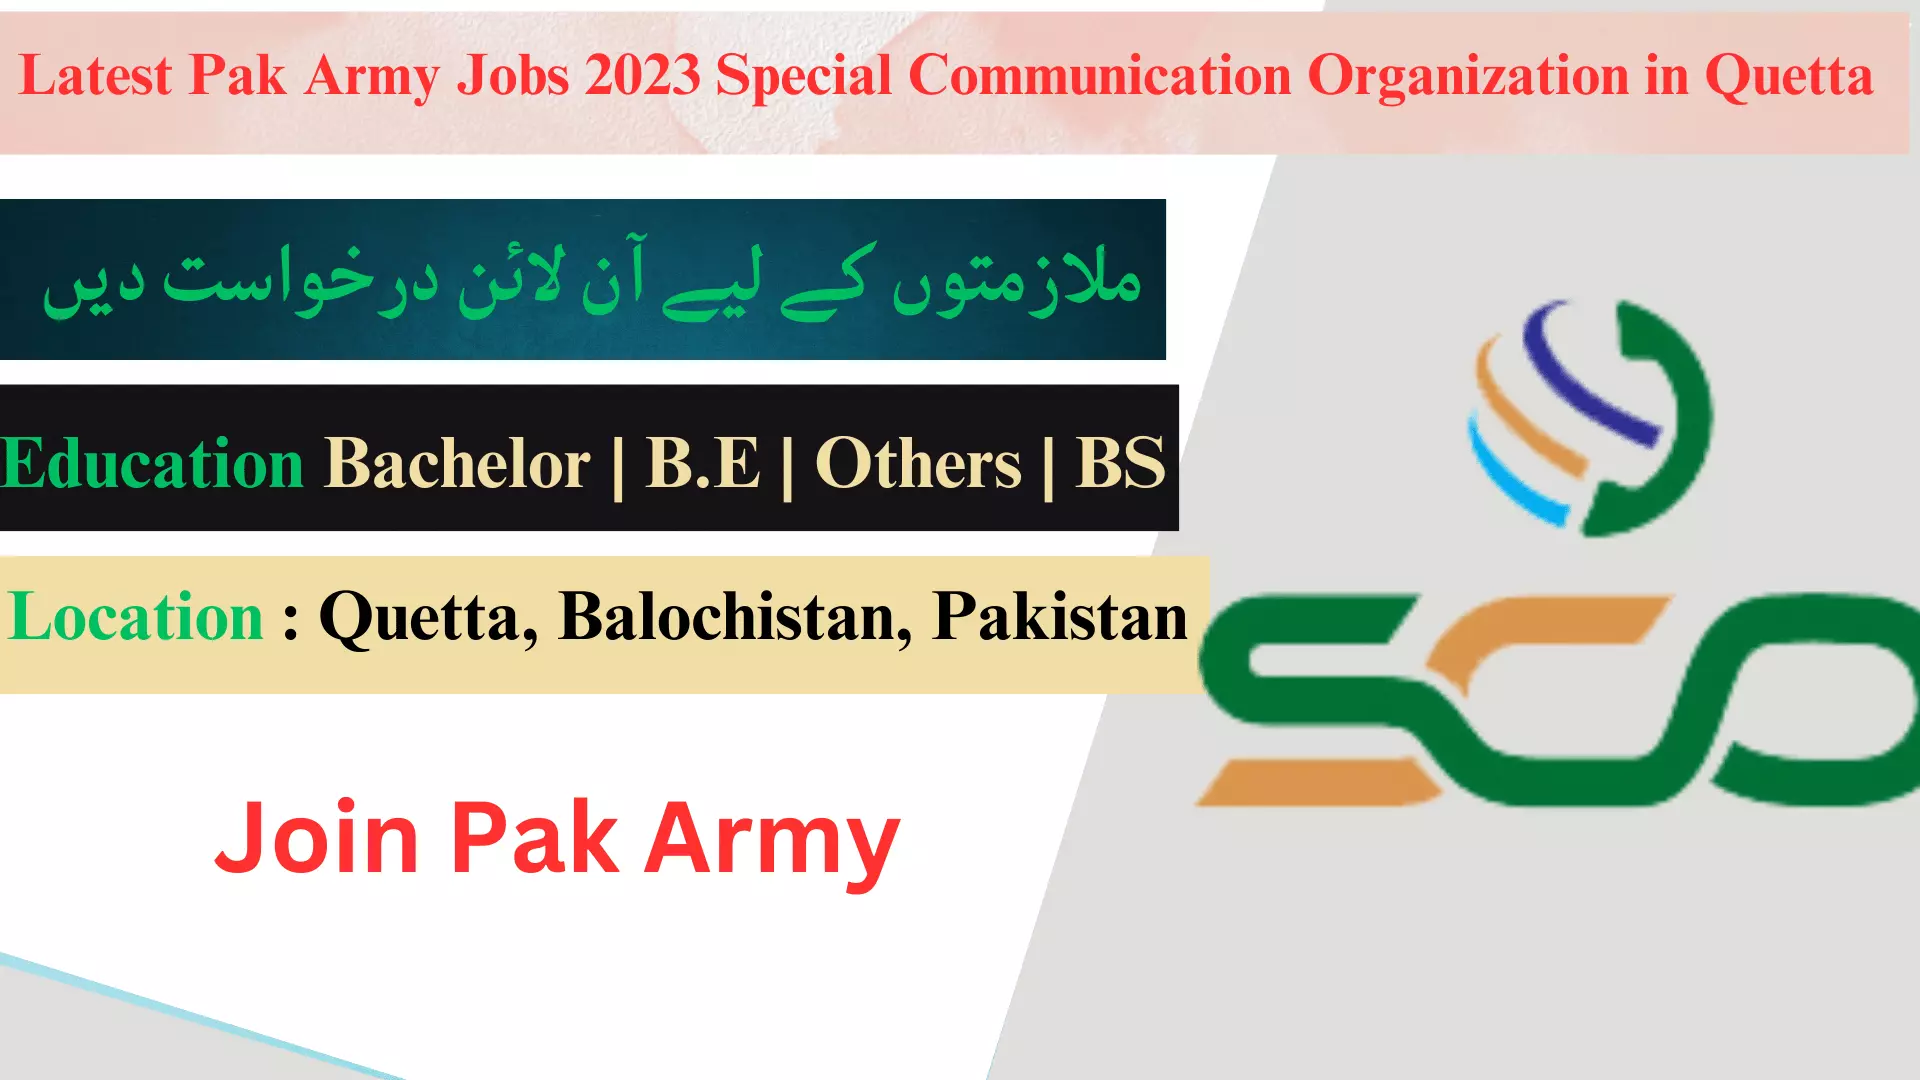 Latest Pak Army Jobs 2023 Special Communication Organization in Quetta